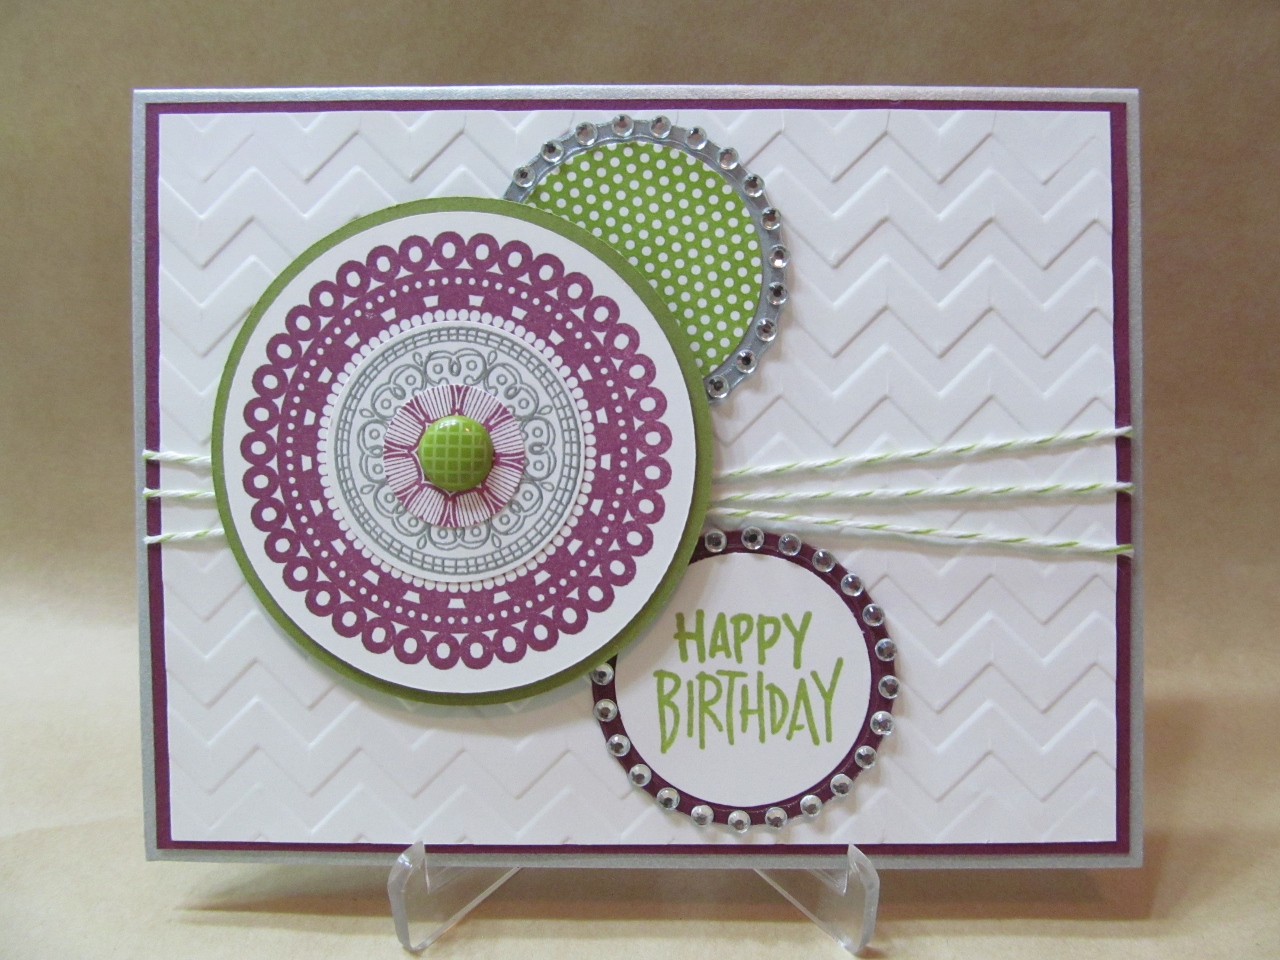 The Collection of Impressive and Beautiful Birthday Cards to Send Your Wishes to Father 4